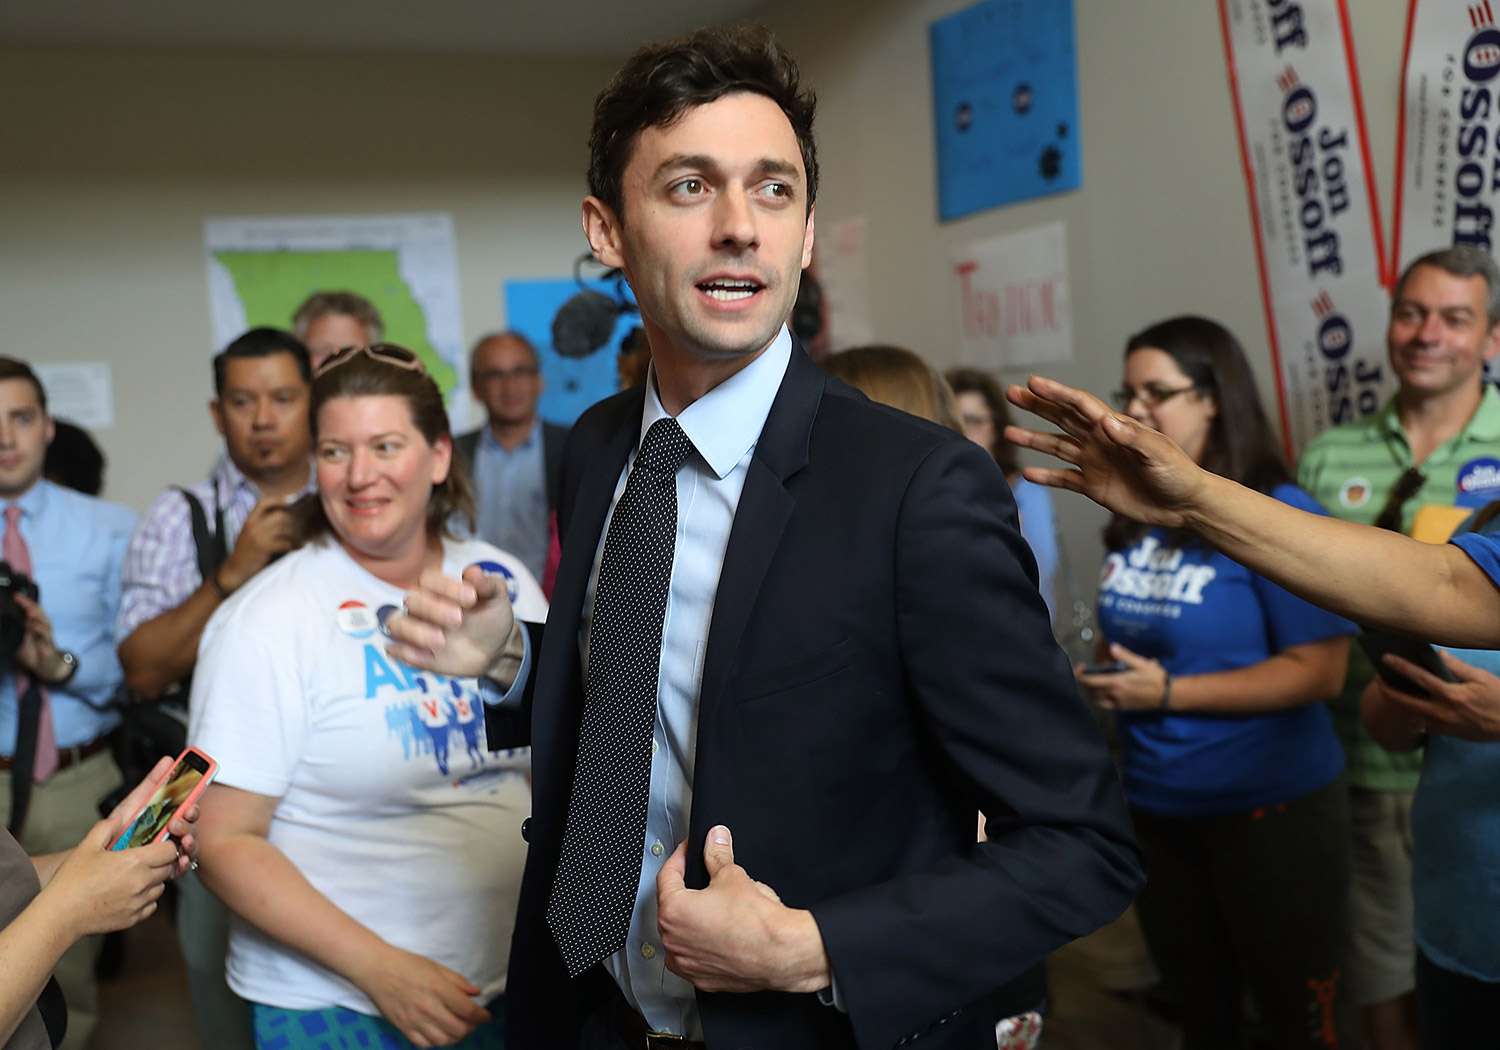 The Serious Side - part 8 - Page 18 Image?url=https%3A%2F%2Fstatic.onecms.io%2Fwp-content%2Fuploads%2Fsites%2F20%2F2020%2F07%2F28%2FJon-Ossoff